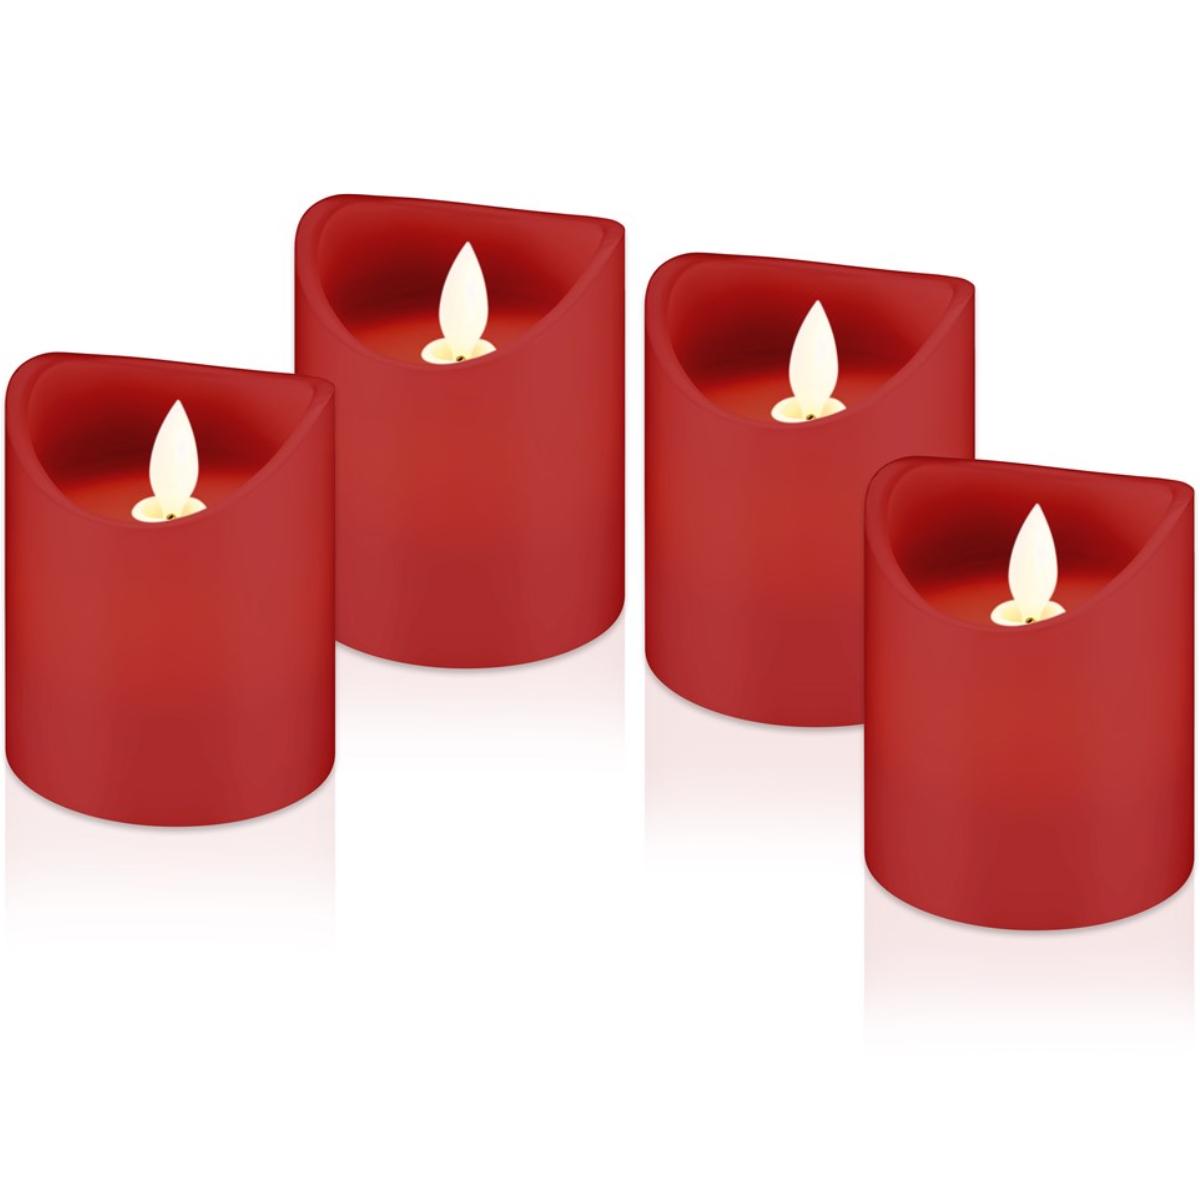 Set of 4 LED real wax candles, red beautiful and safe lighting solution - Goobay